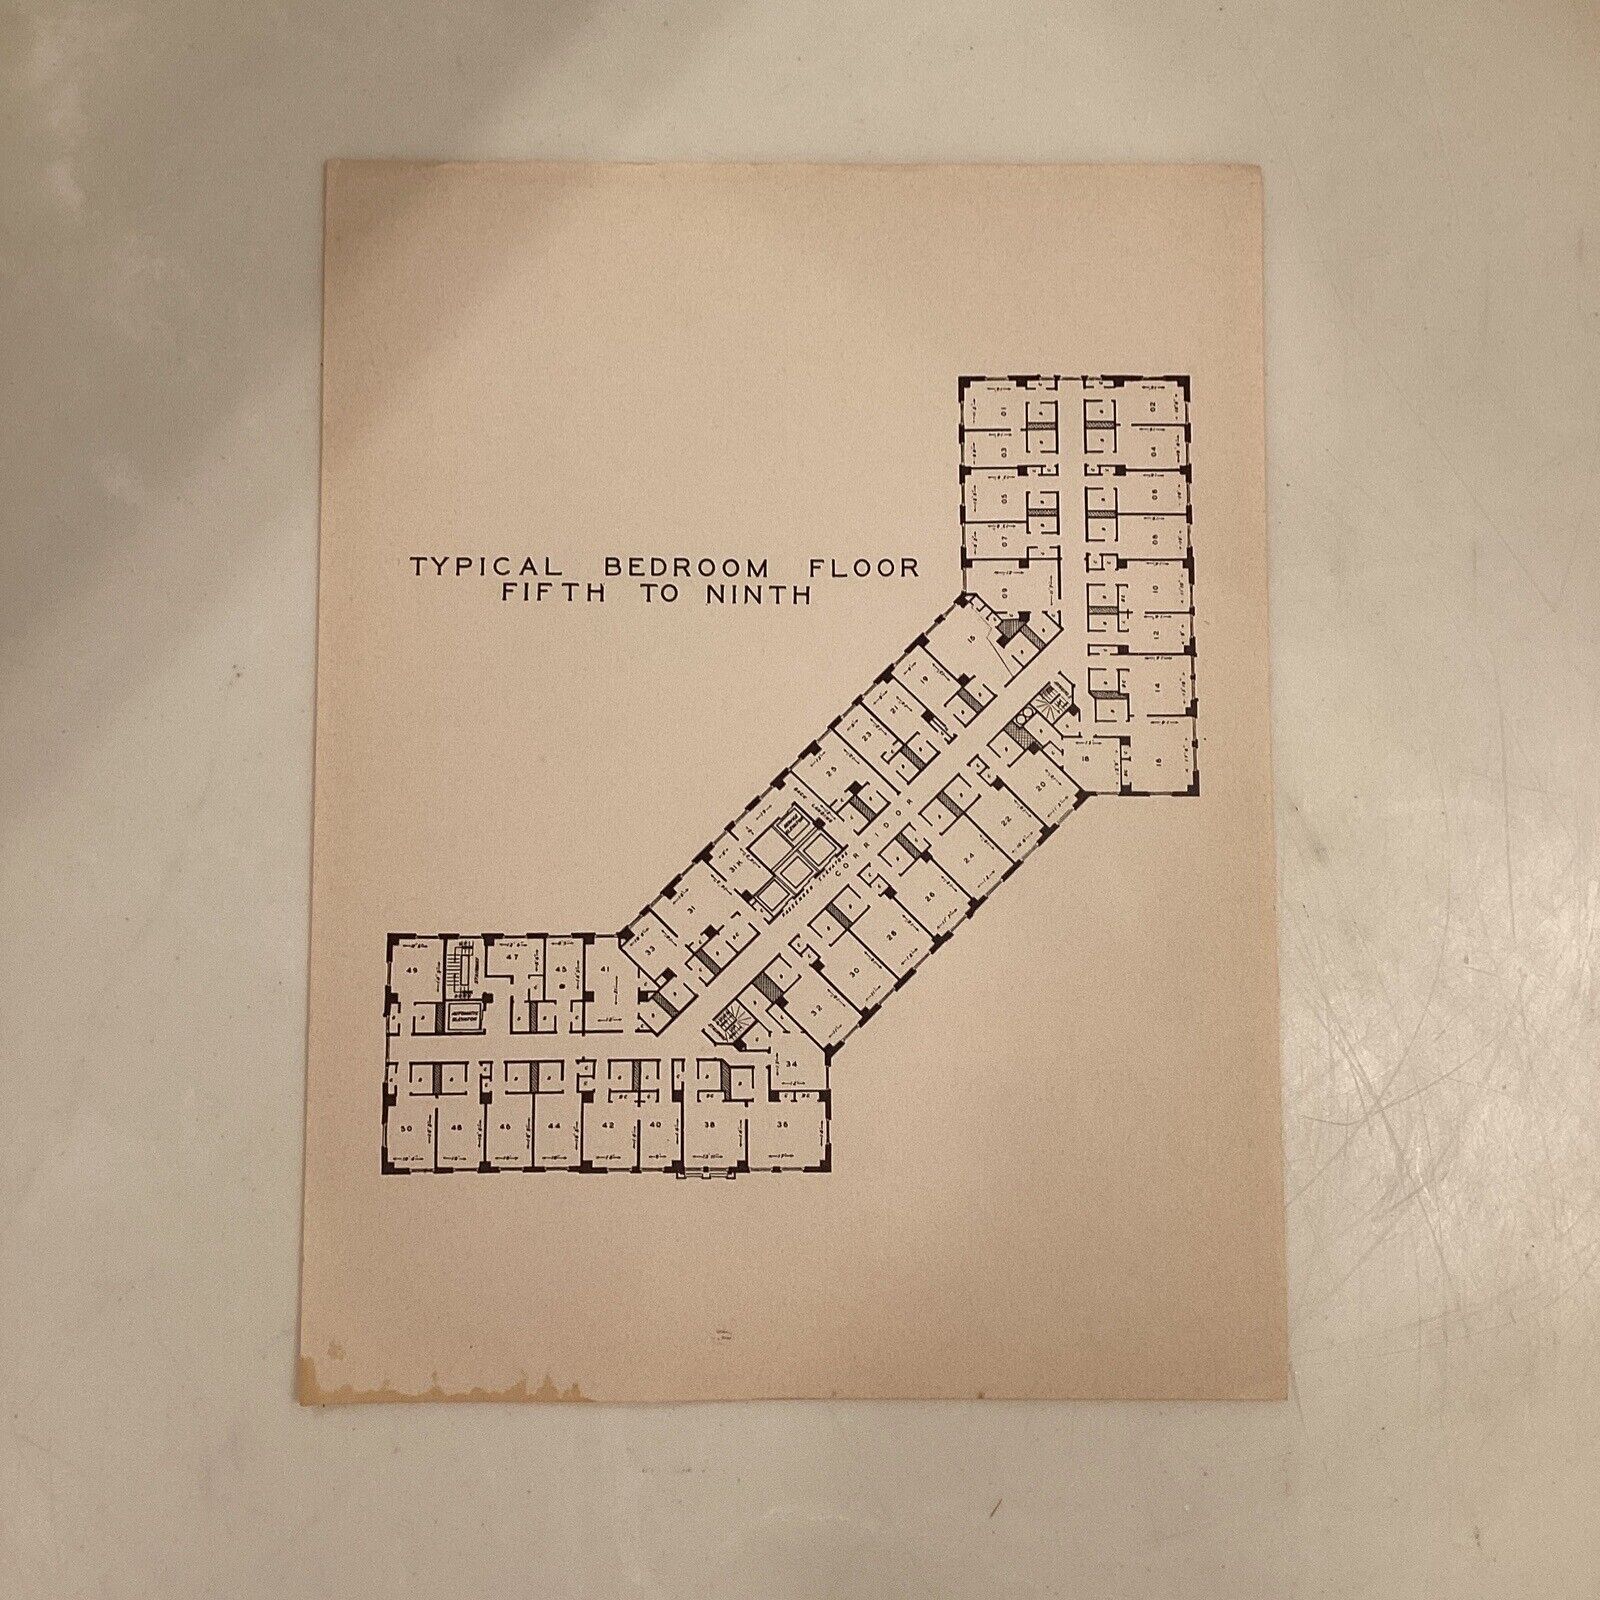 Baker Hotel Mineral Wells TX Floor Plan Paper Typical Bedroom Fifth To Ninth